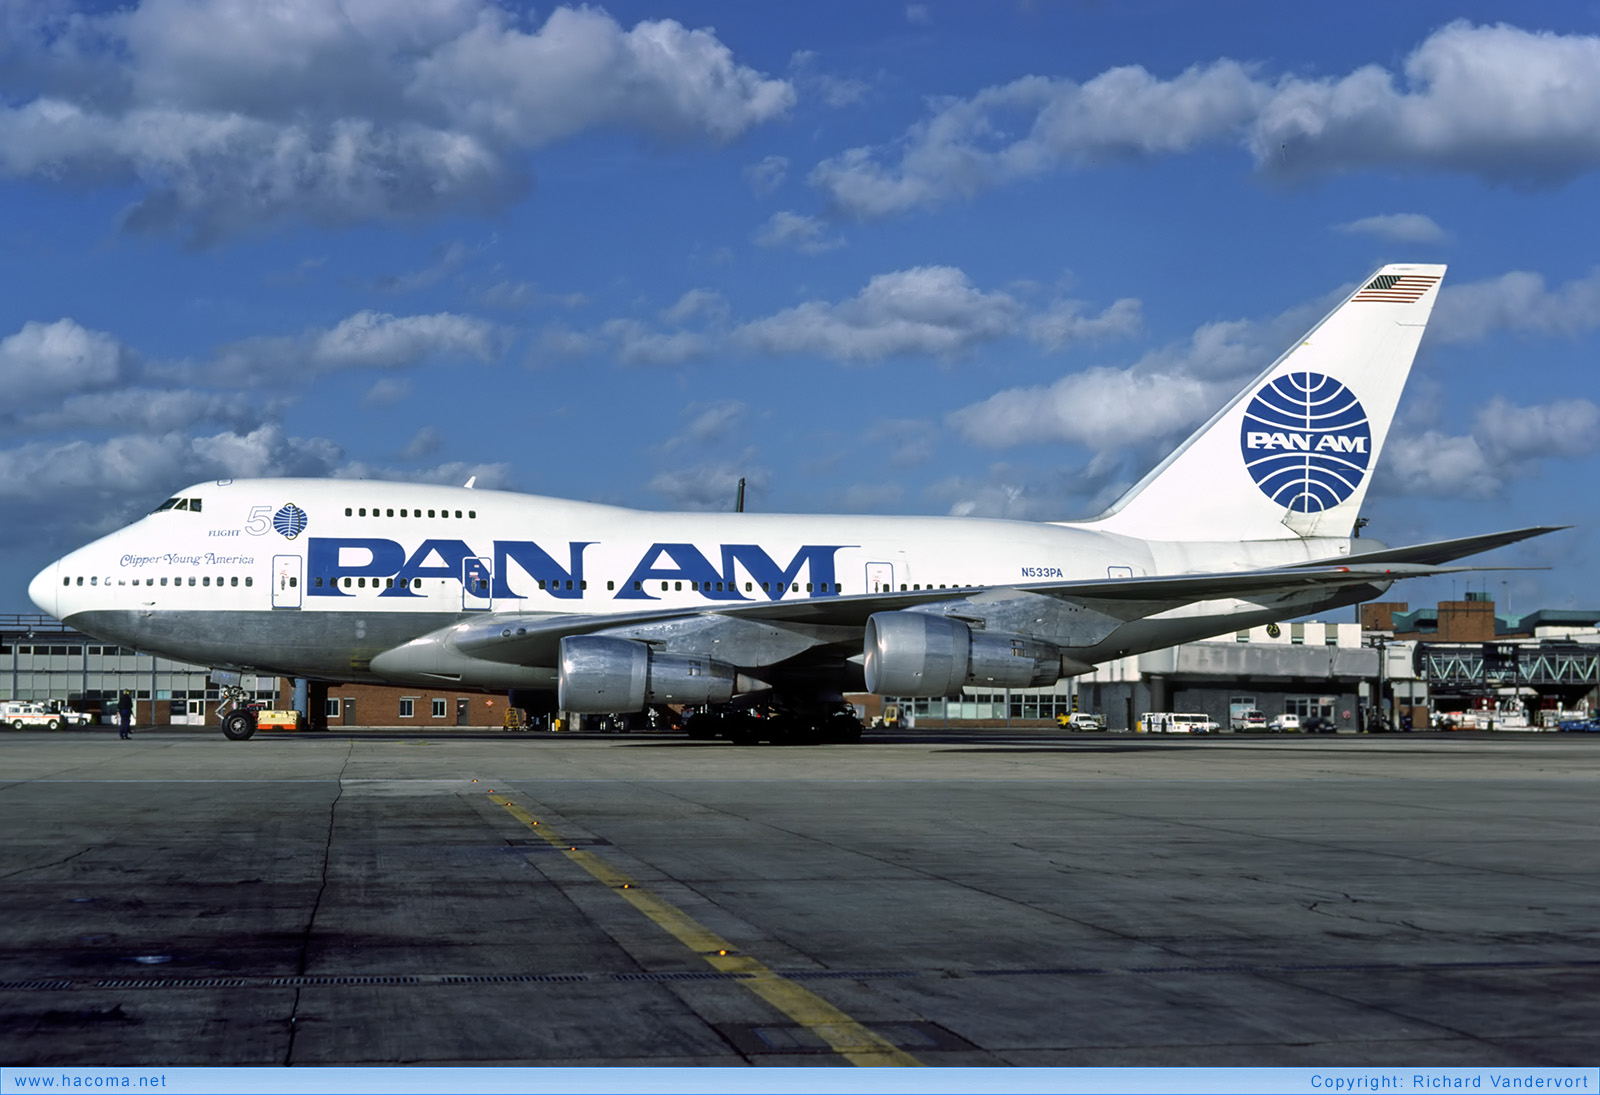 Photo of N533PA - Pan Am Clipper Freedom / Liberty Bell / New Horizons / Young America / San Francisco - London Heathrow Airport - Oct 1985